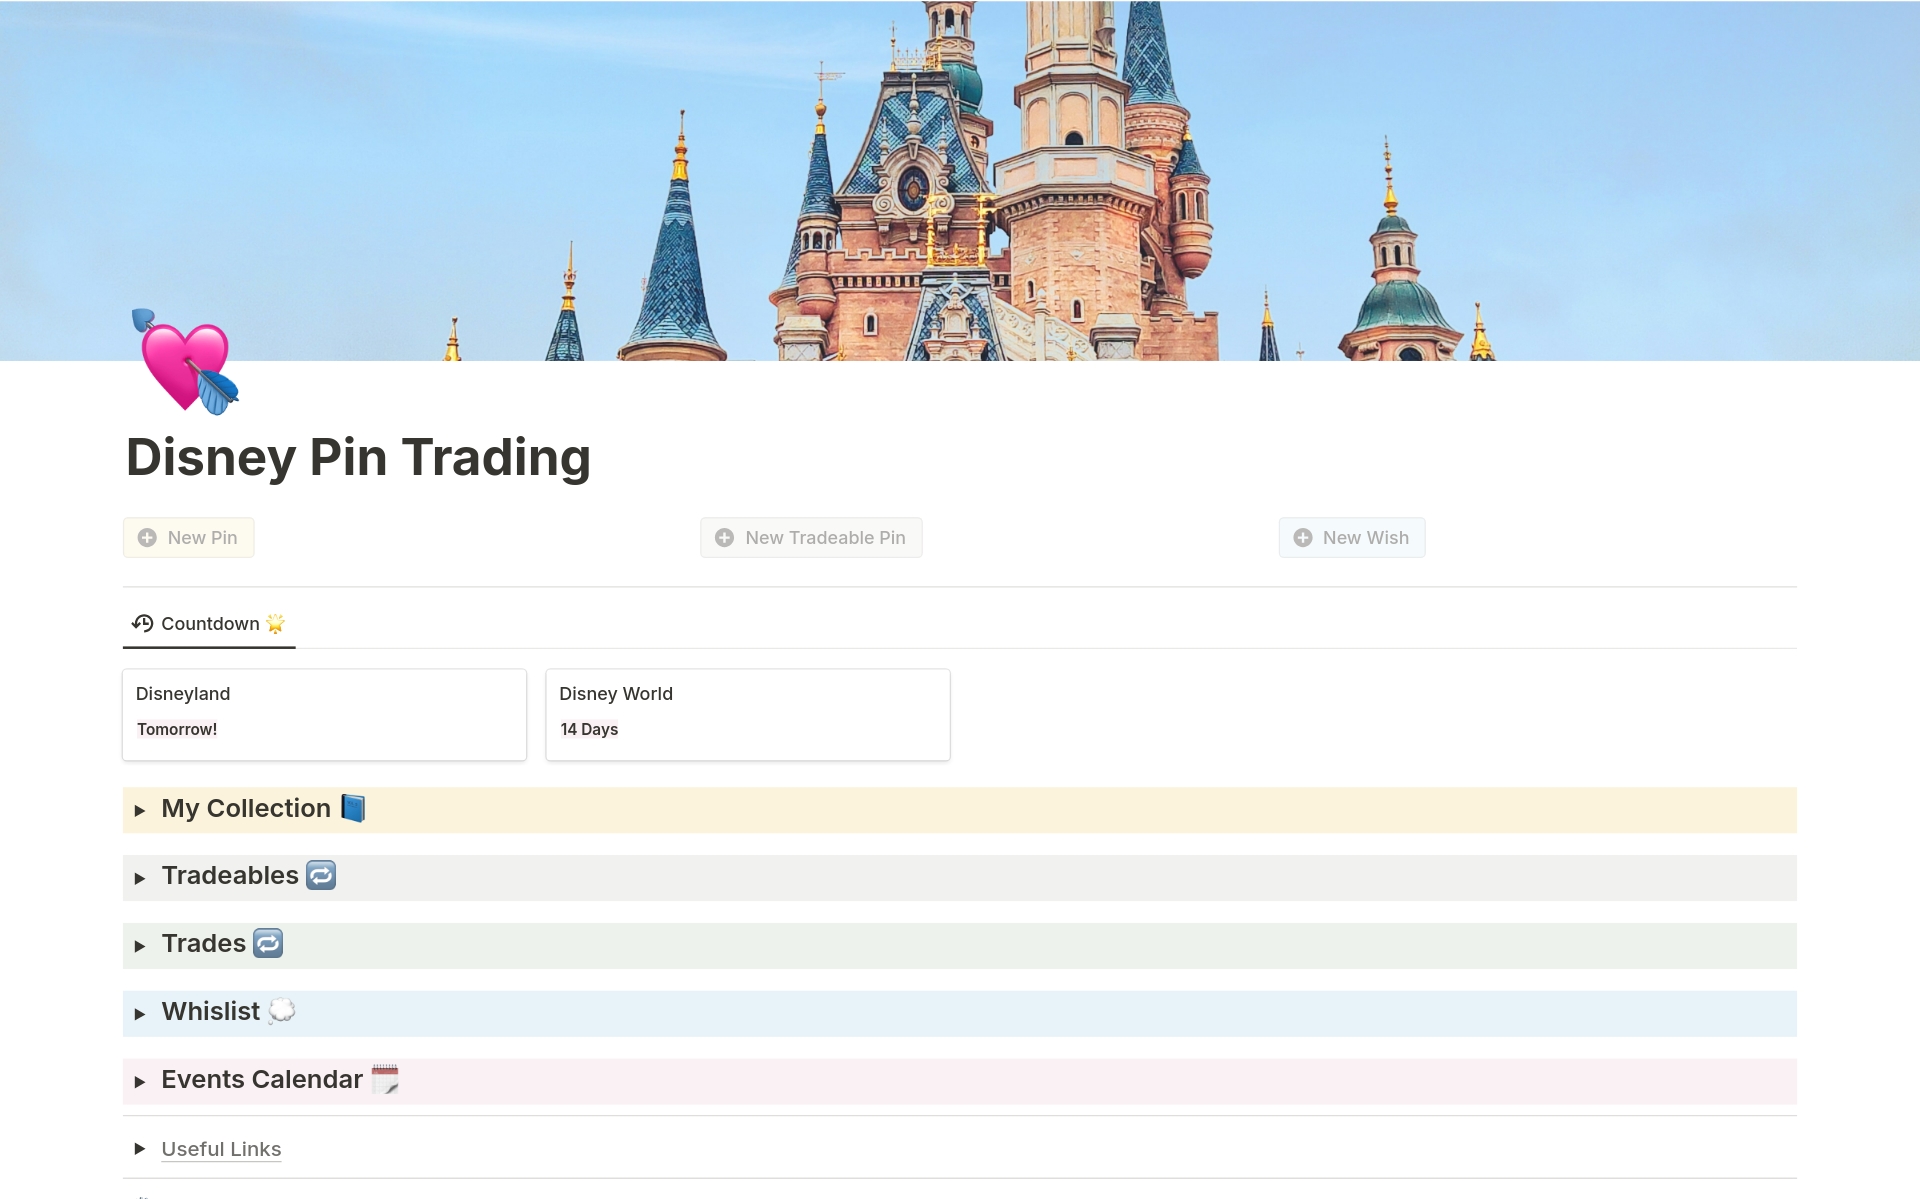 I originally created this template for my fiancée who is a huge Disney pin collector.

This is an essential tool for all traders. Whether you're a beginner or a long-time collector, it enables you to carry your entire pin collection with you at all times!